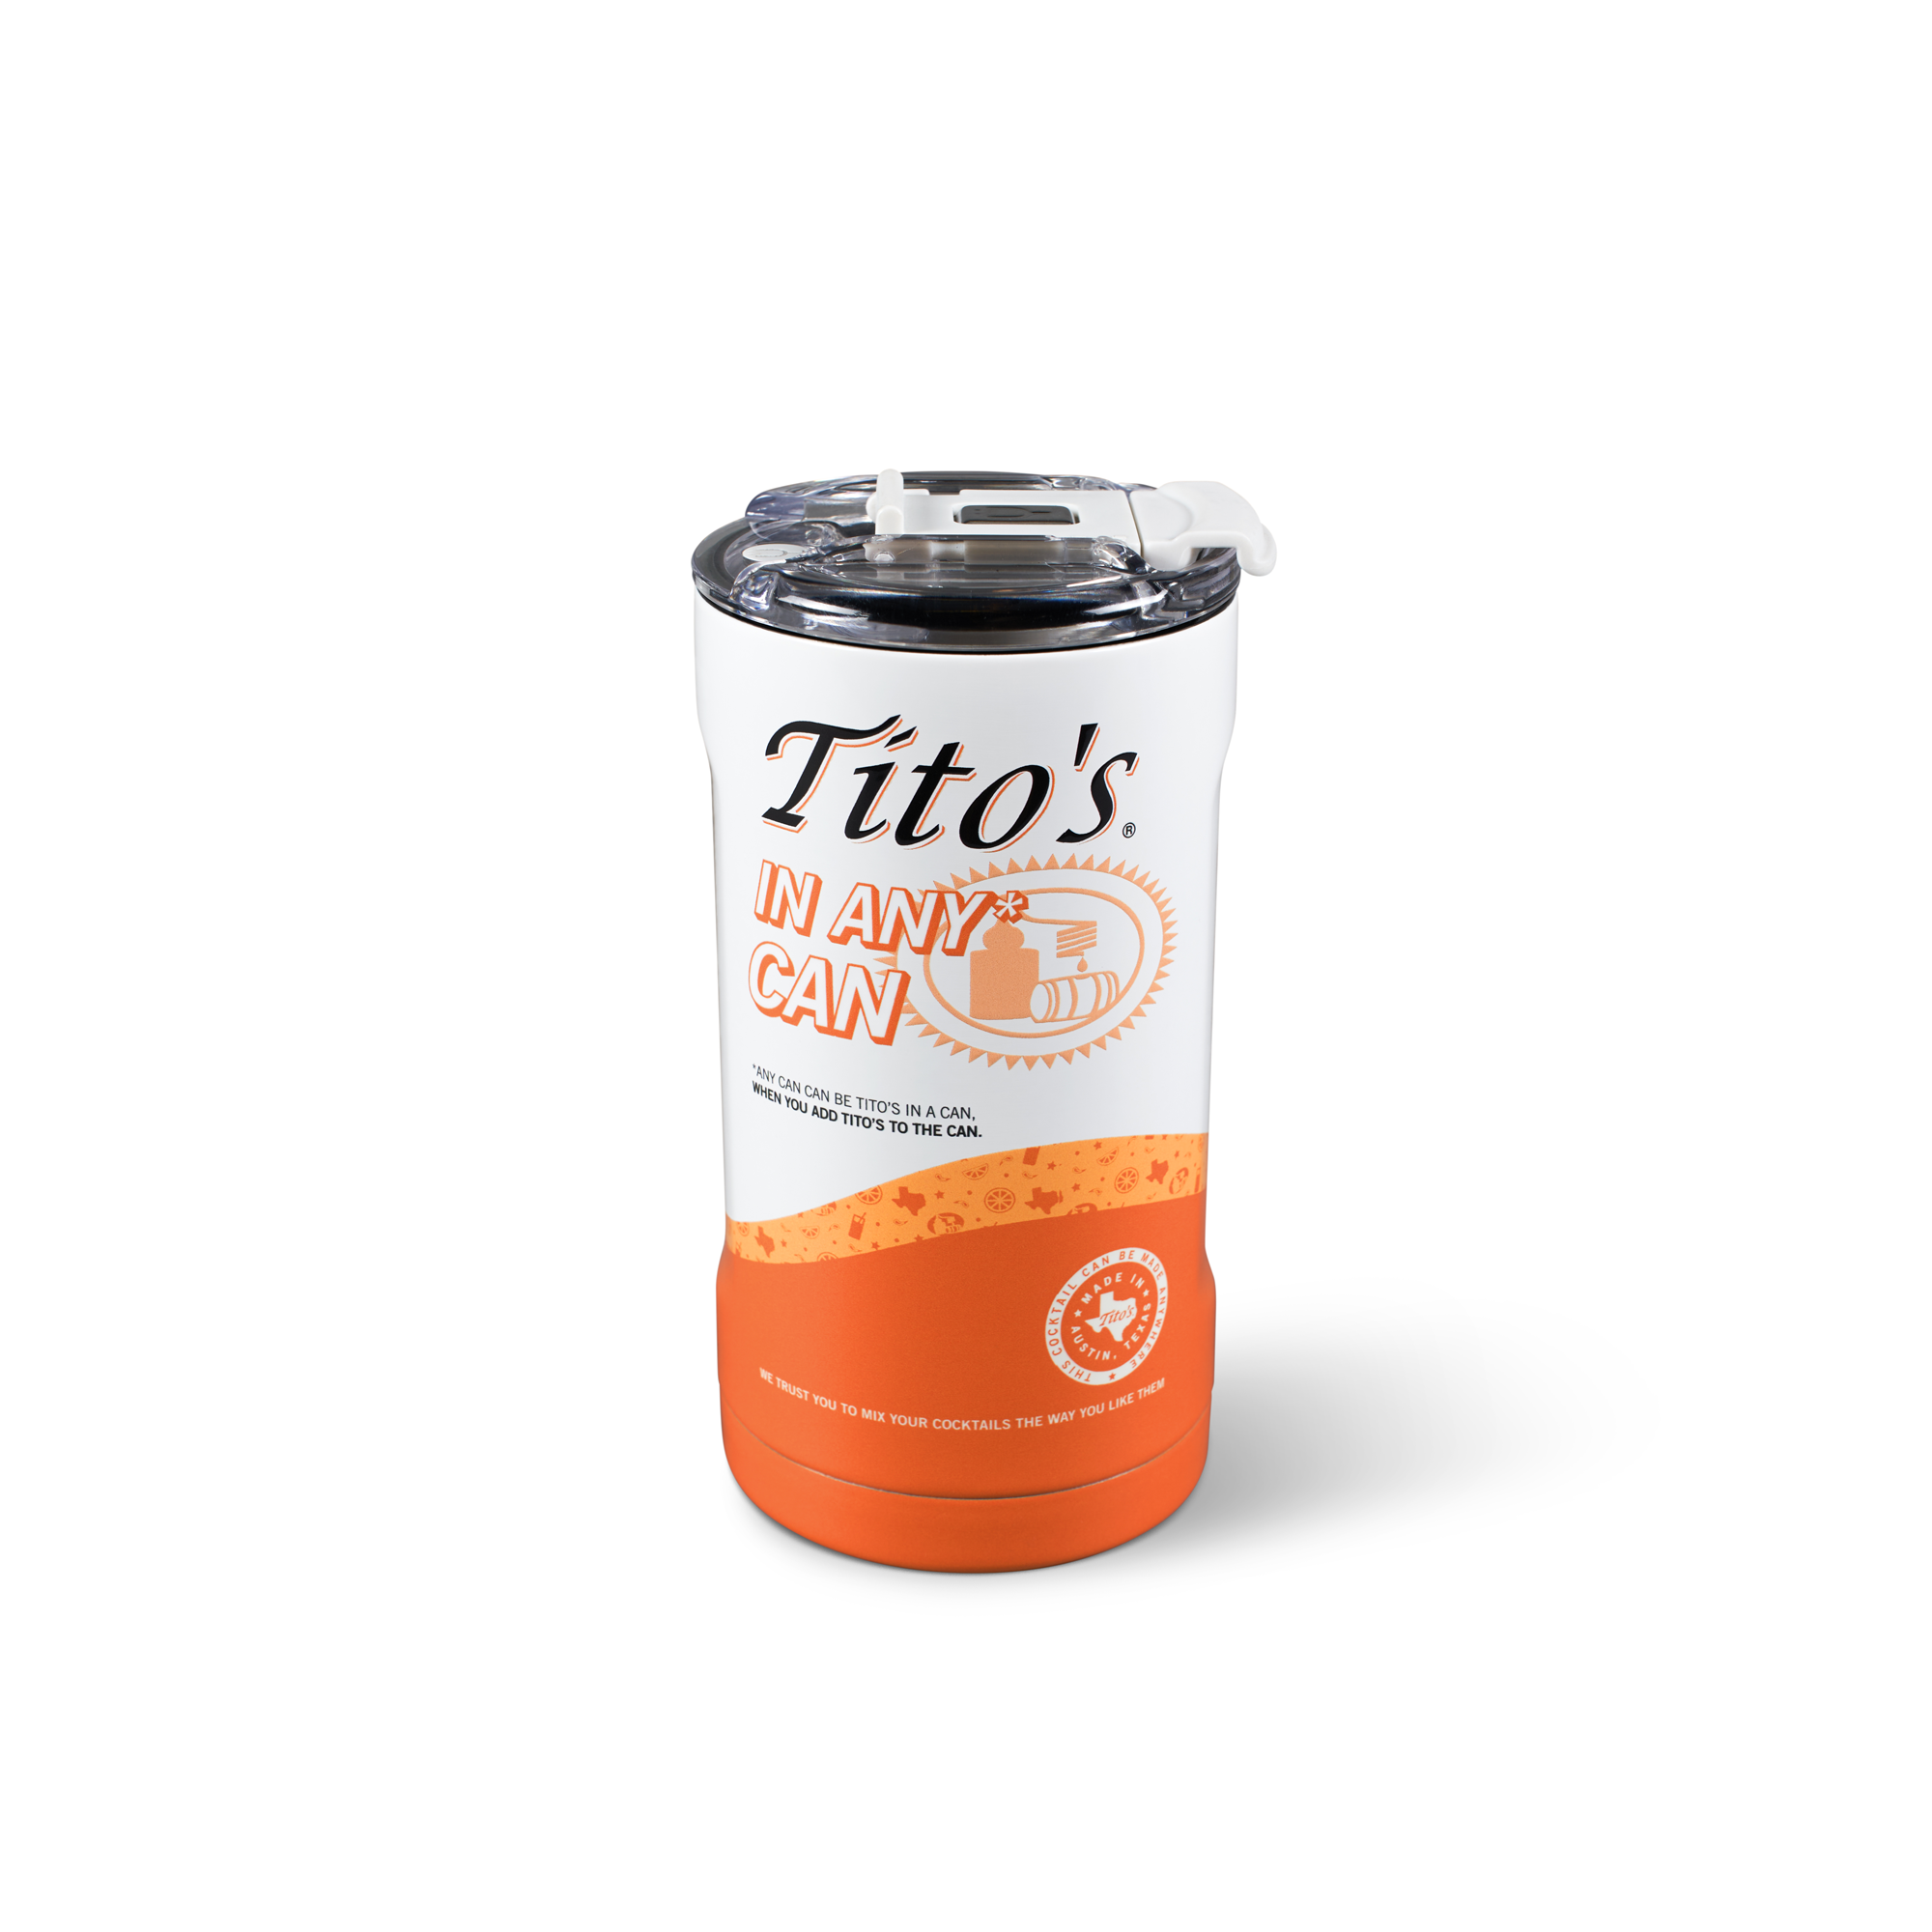 Orange and white Tito's in Any* Can cooler-can-tumbler with lid